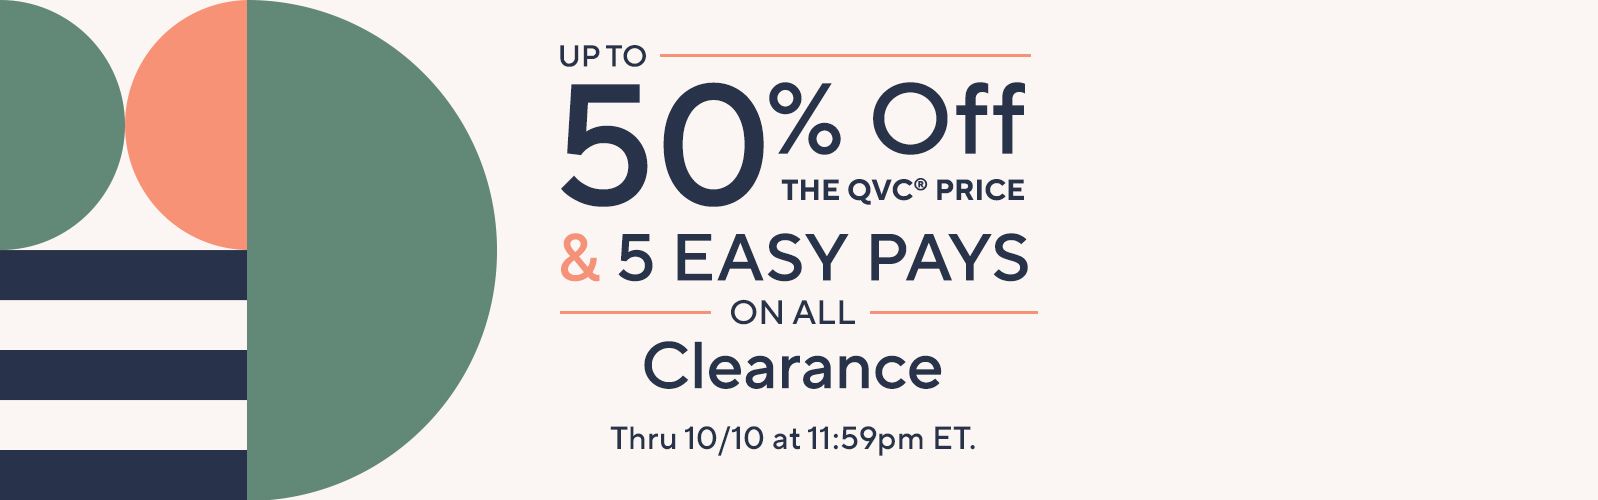 Up to 50% Off the QVC® Price & 5 Easy Pays on All Clearance Thru 10/10 at 11:59pm ET.